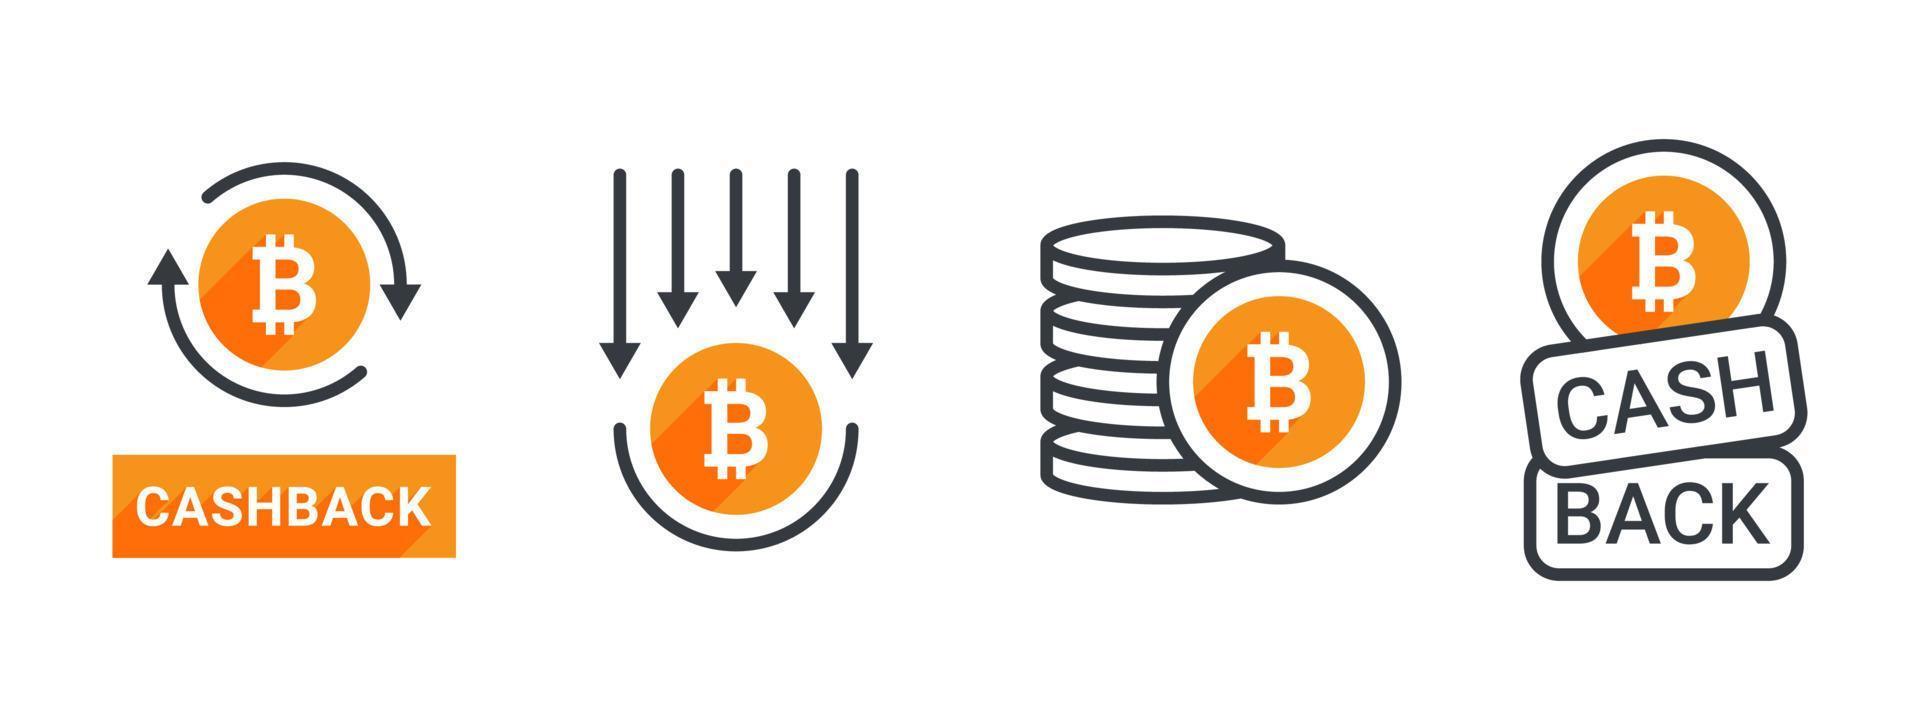 Cashback icon Bitcoin set. Cryptocurrency Icons. Return money. Business and finance editable icons. Vector illustration